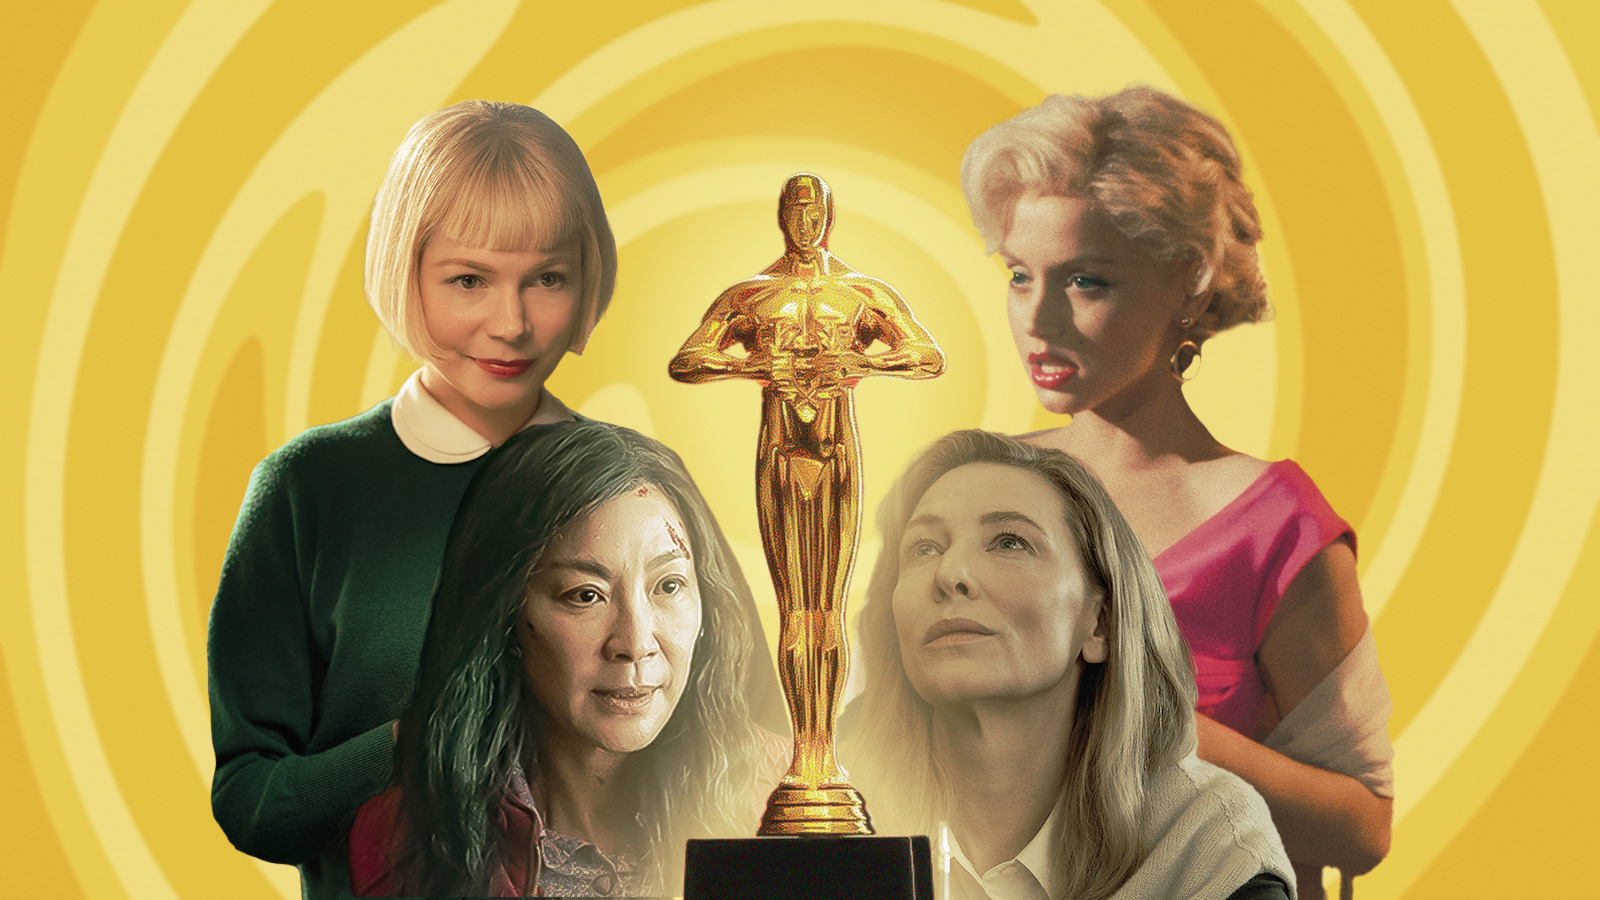 The 2023 Oscars Best Actress Nominees - Who Will Win & Who Should Win